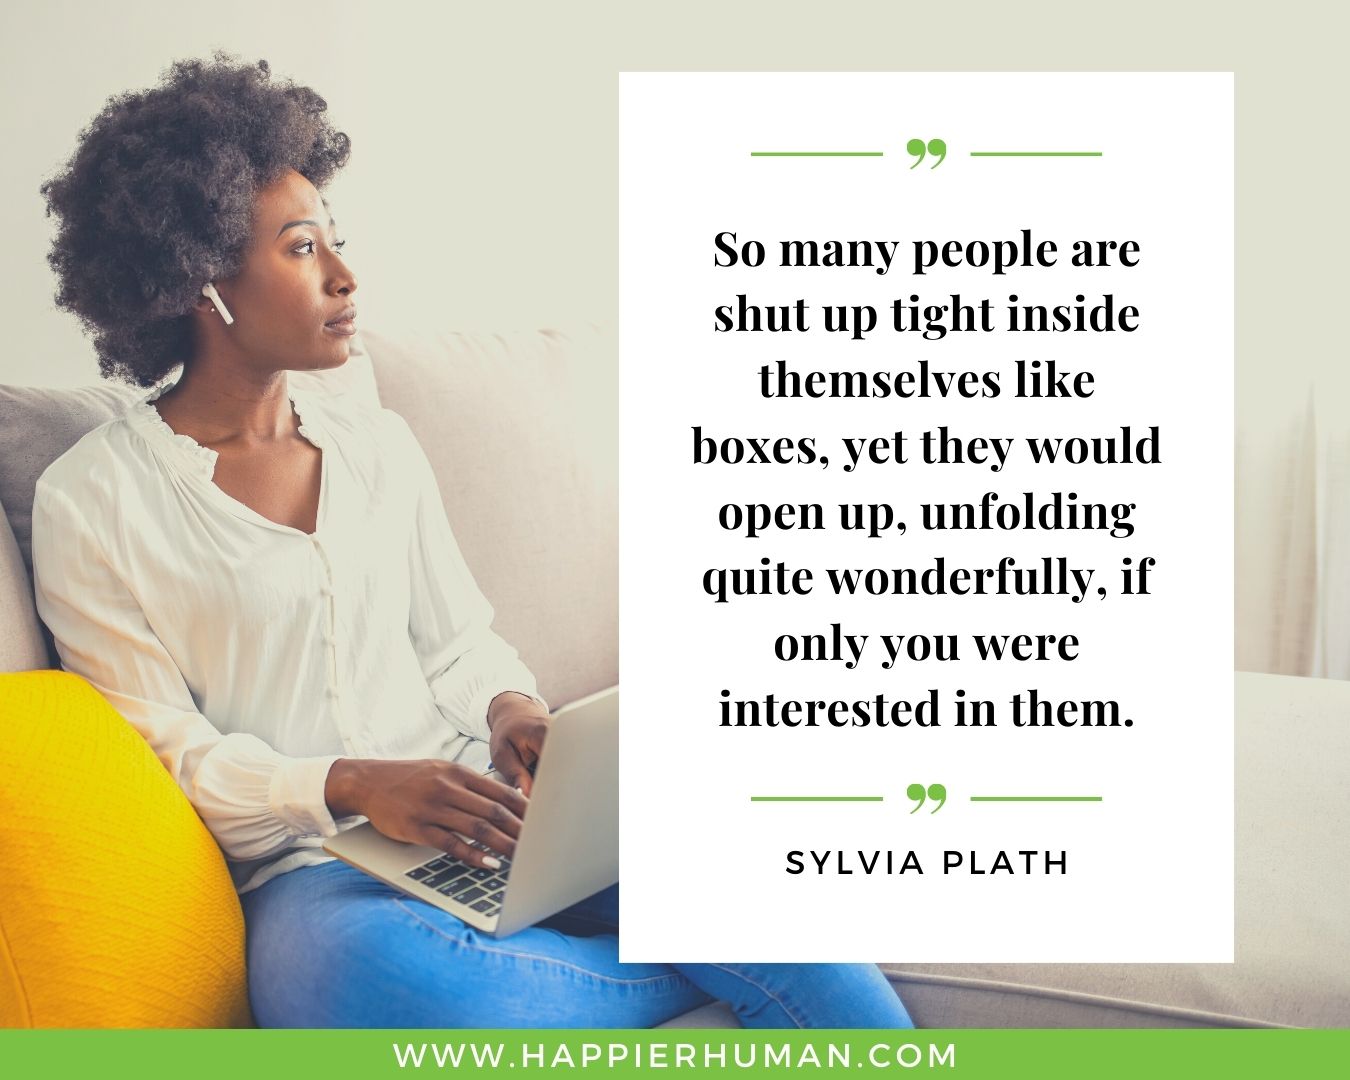 Introvert Quotes - “So many people are shut up tight inside themselves like boxes, yet they would open up, unfolding quite wonderfully, if only you were interested in them.” – Sylvia Plath